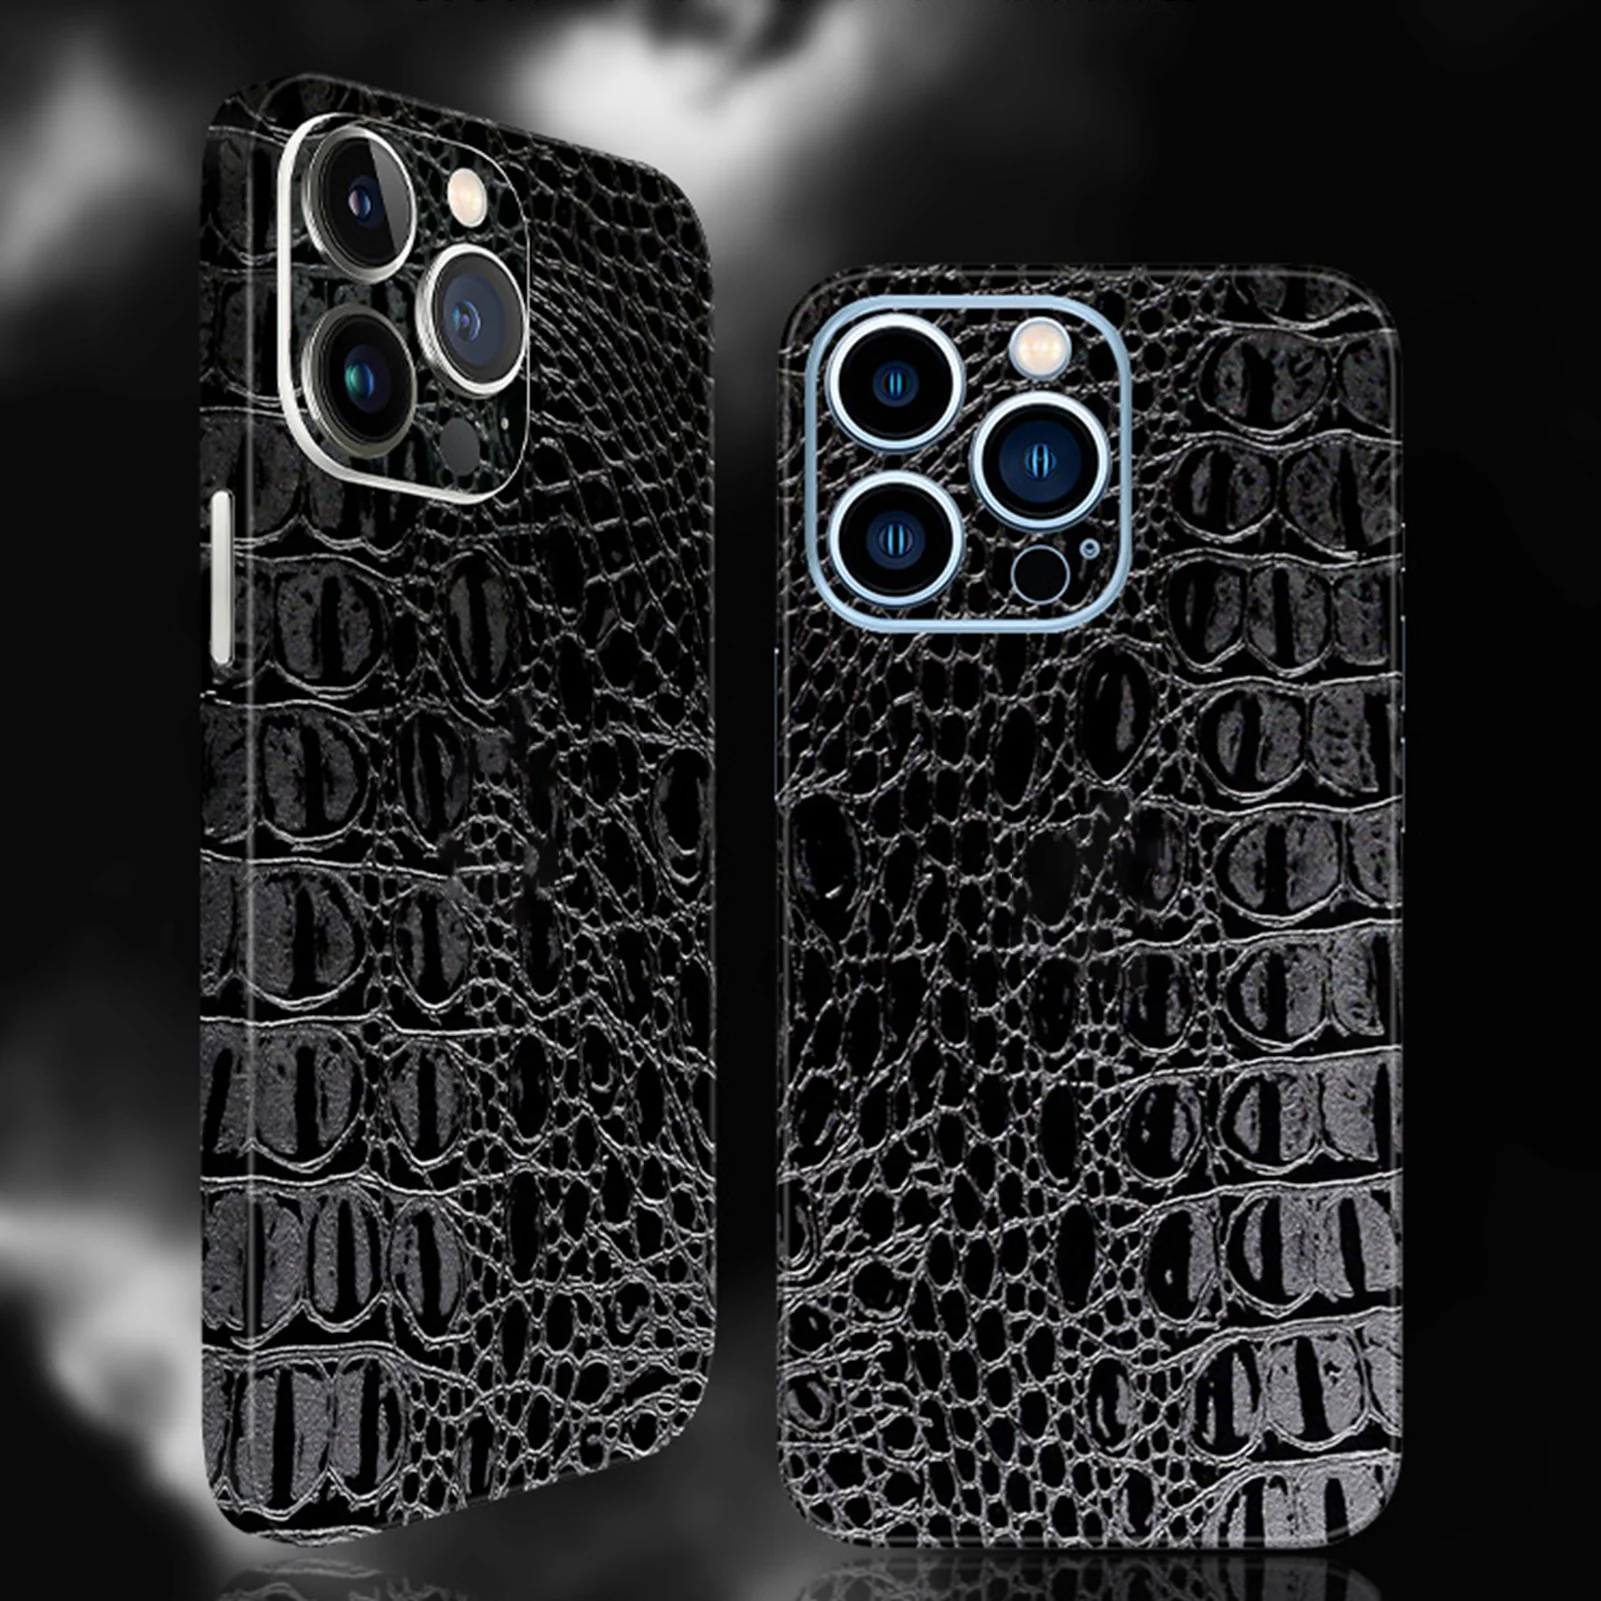 Crocodile Pattern Matte Skins Film Luxury Phone Back Sticker For iPhone 13 11 12 Pro Max 8 Plus X XS XR Colorful Wrap Skin